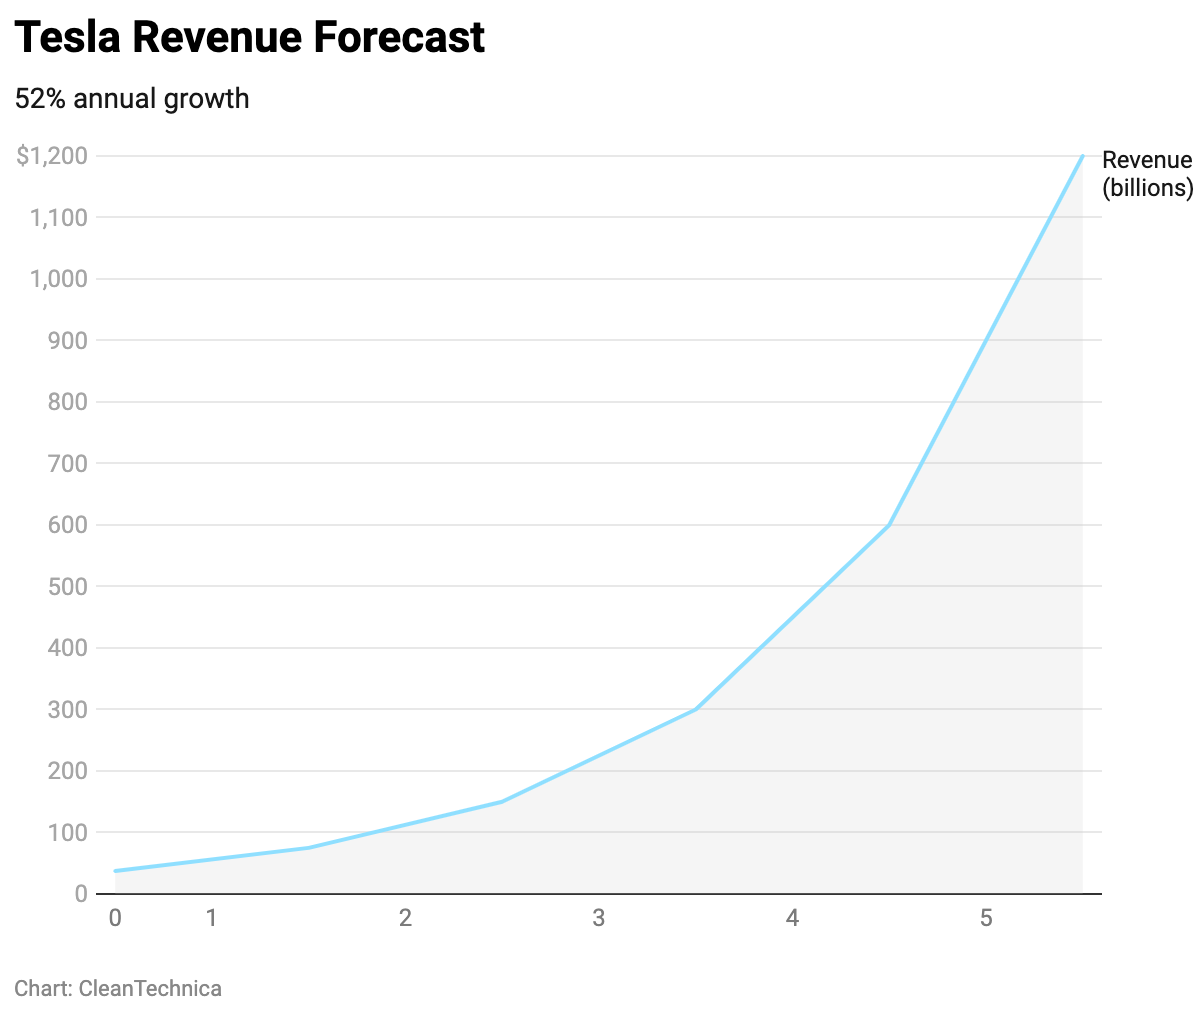 Revenue and Production Forecasts for Tesla in 2022